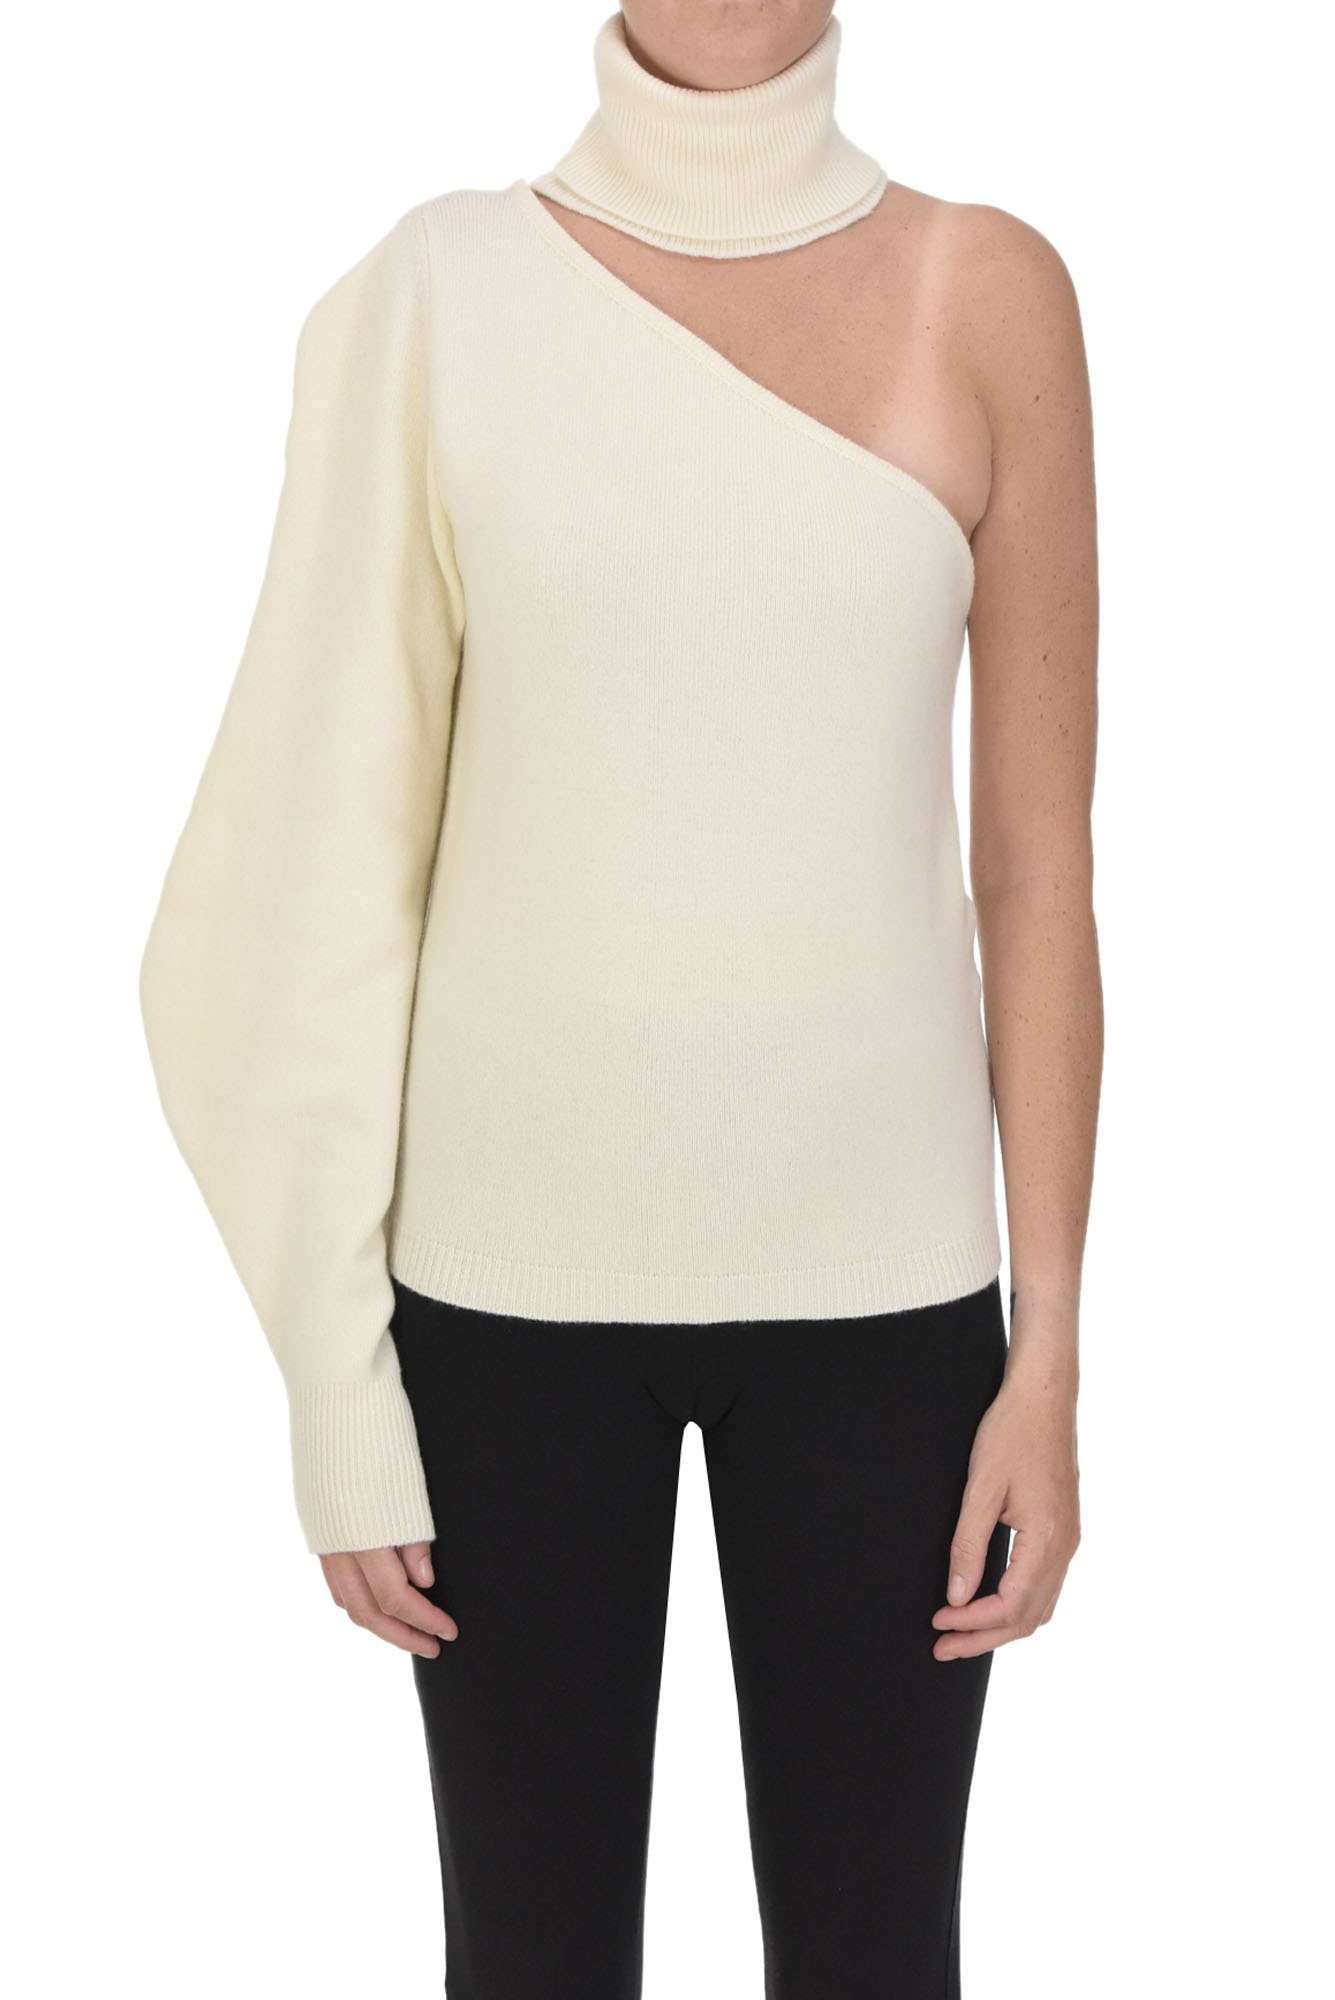 Federica Tosi One Shoulder Pullover In Ivory